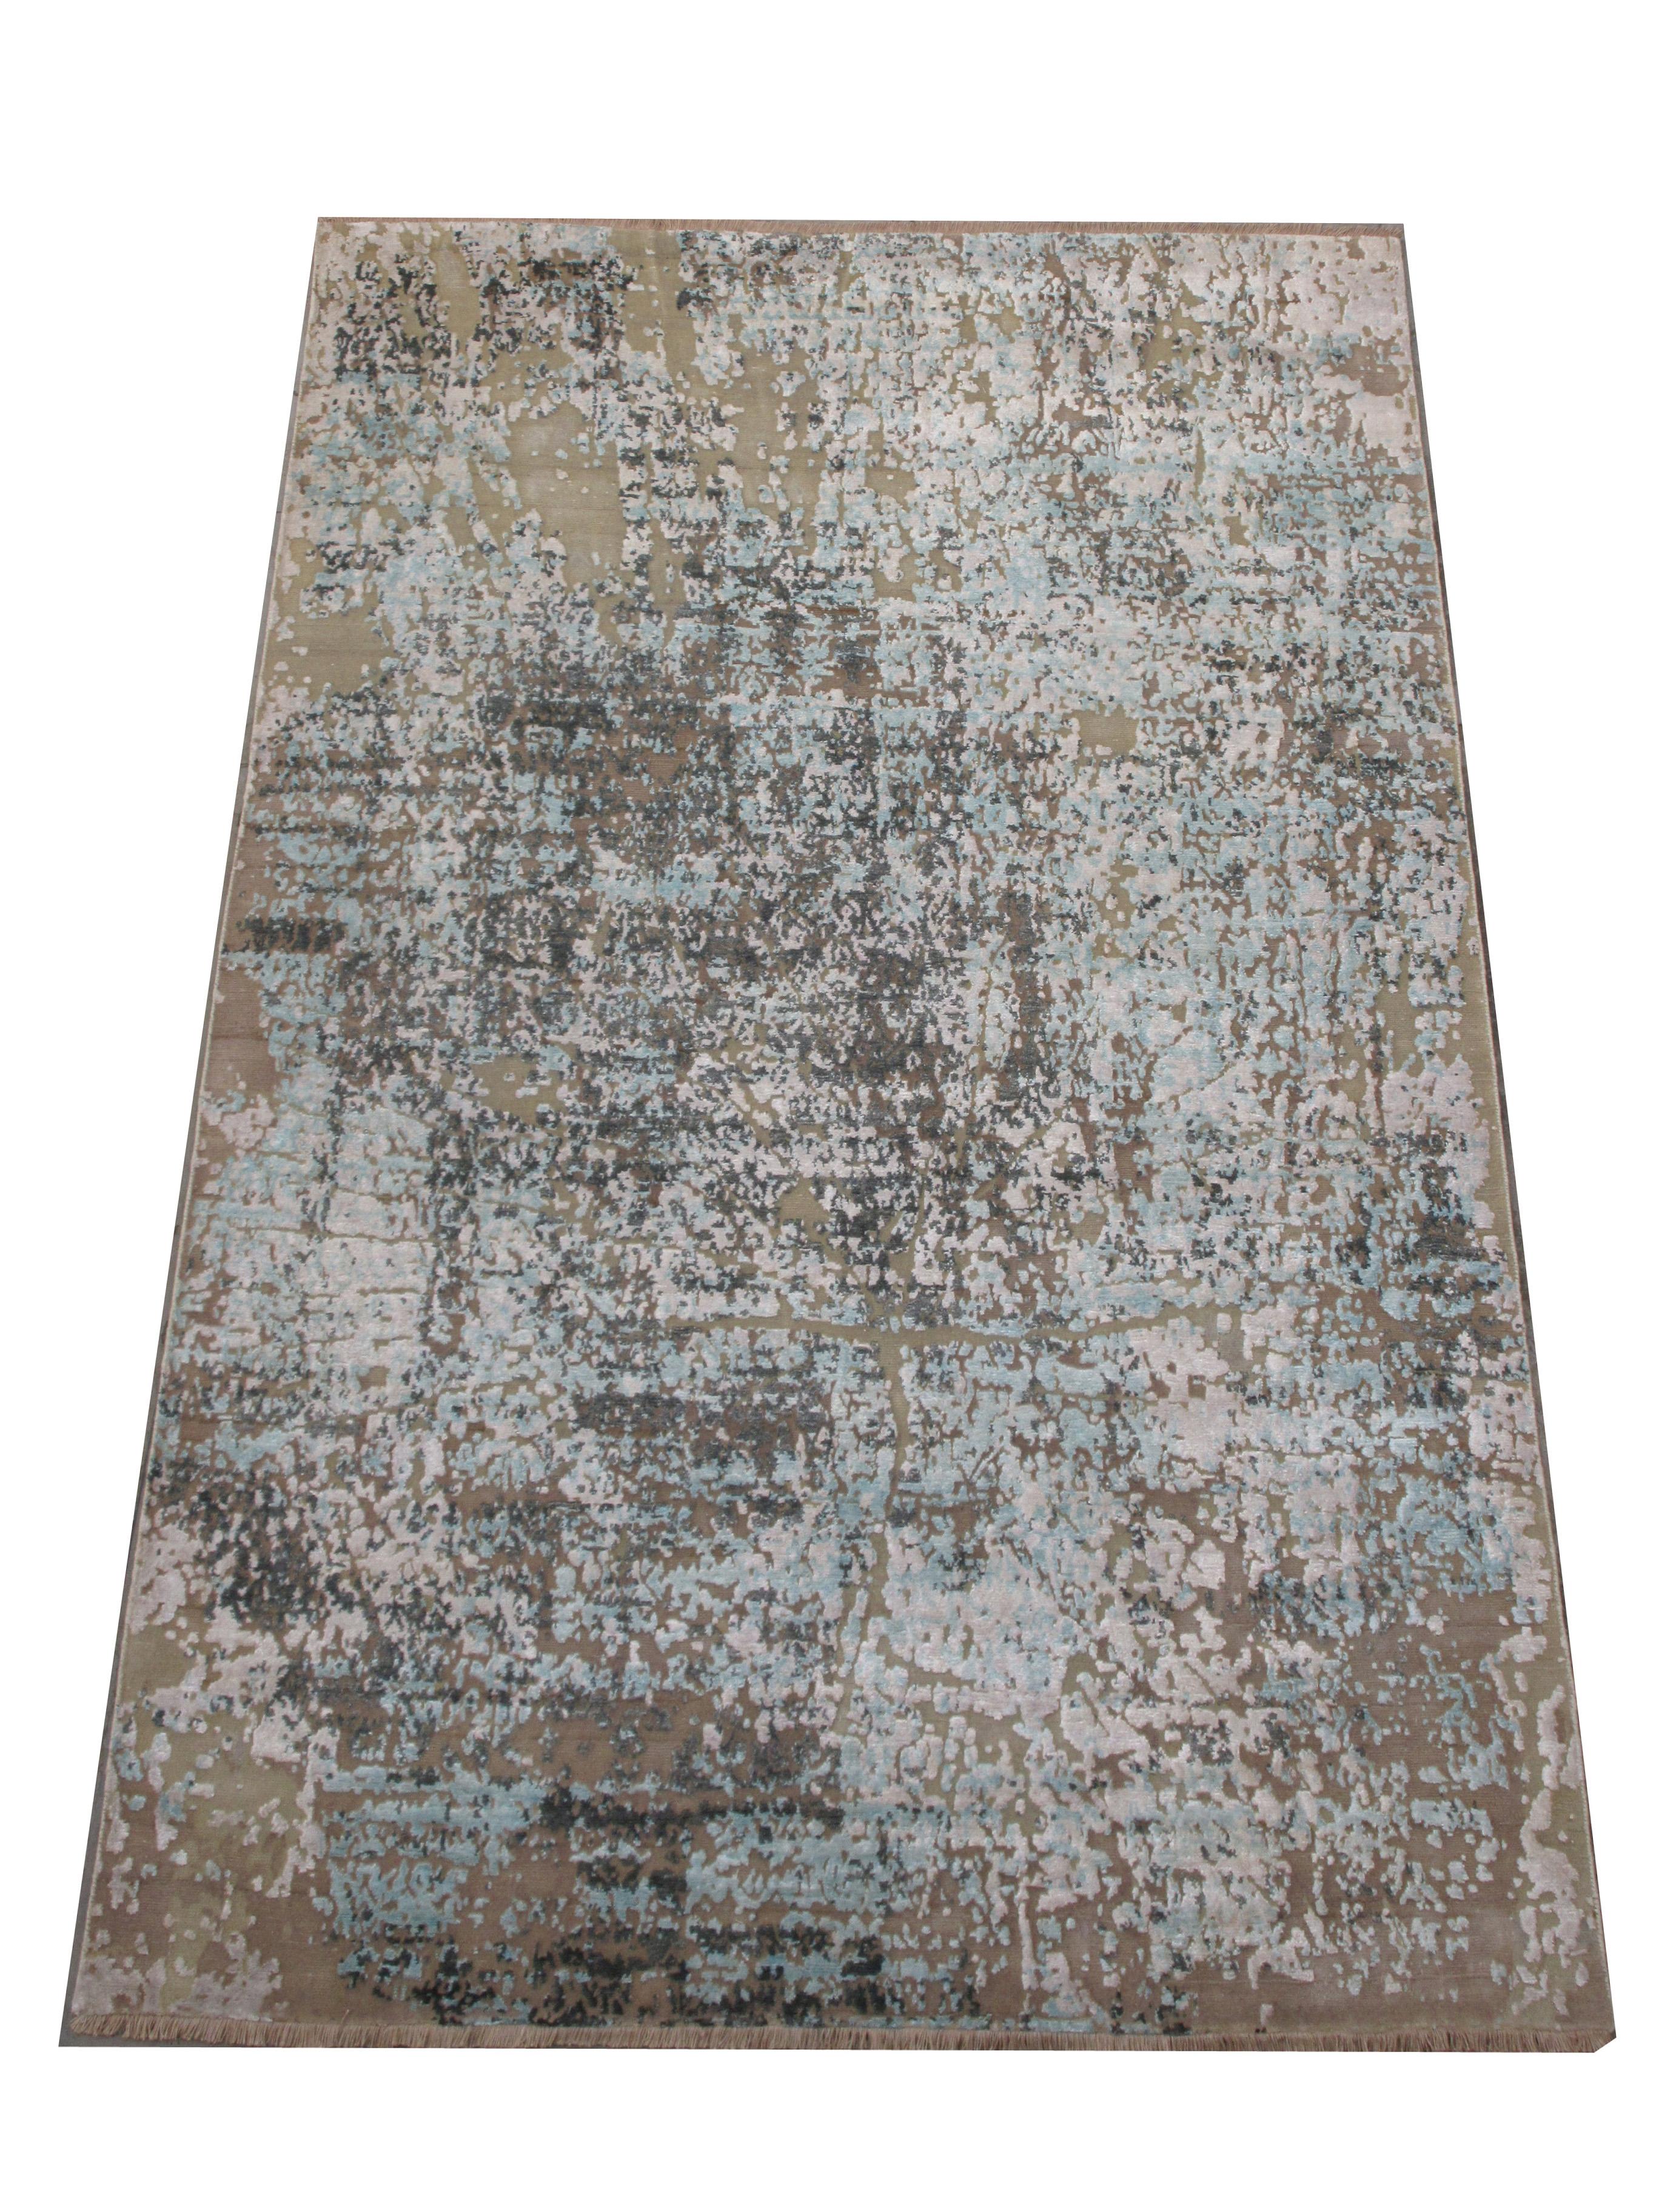 Hand knotted wool & silk pile on a cotton foundation. 

Oxidized Design

Dimensions: 7'10